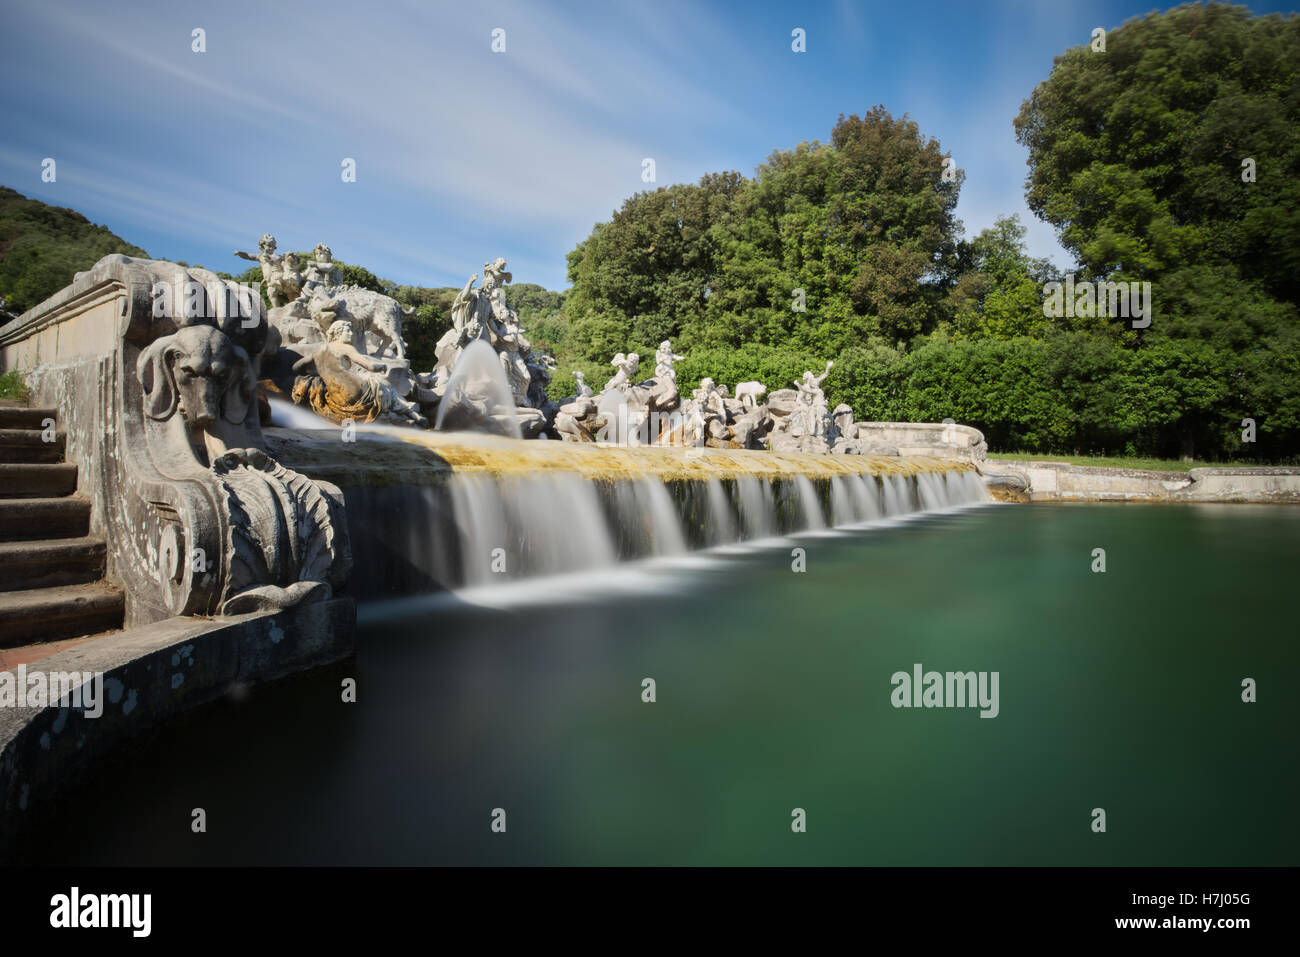 Long exposure of The Fountain of Venus and Adonis. Royal Palace of Caserta (Park) Stock Photo